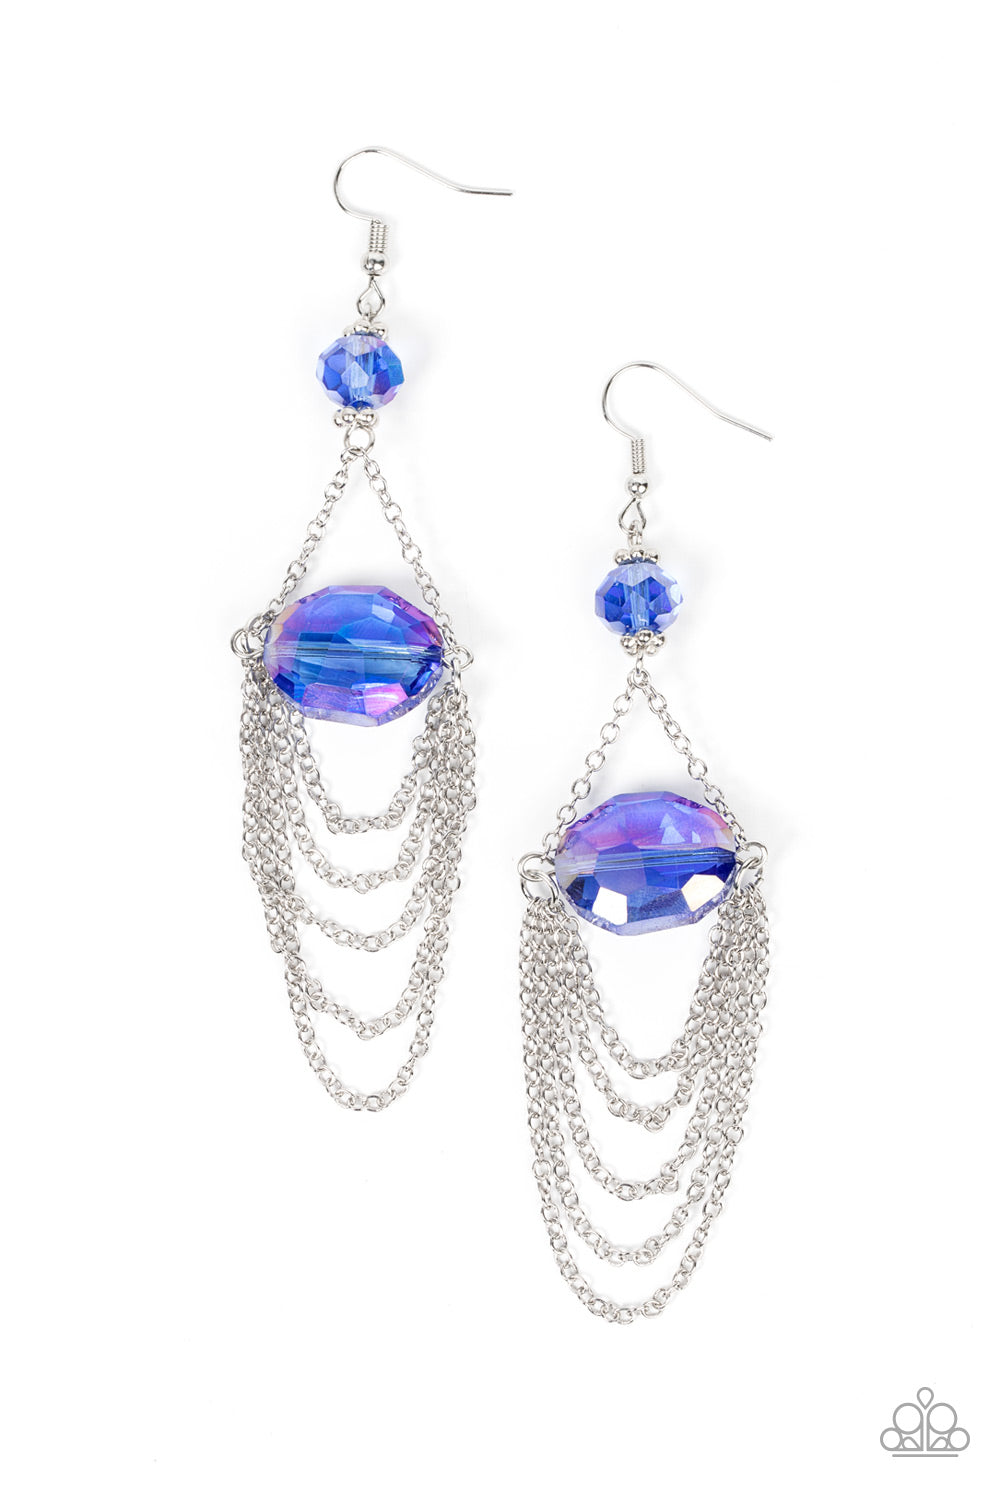 Ethereally Extravagant Blue Earring - Paparazzi Accessories  Tiers of dainty silver chains delicately layer from an oversized oval iridescent blue gem that is suspended from a faceted matching blue crystal-like bead, resulting in an ethereal chandelier. Earring attaches to a standard fishhook fitting.  Sold as one pair of earrings.